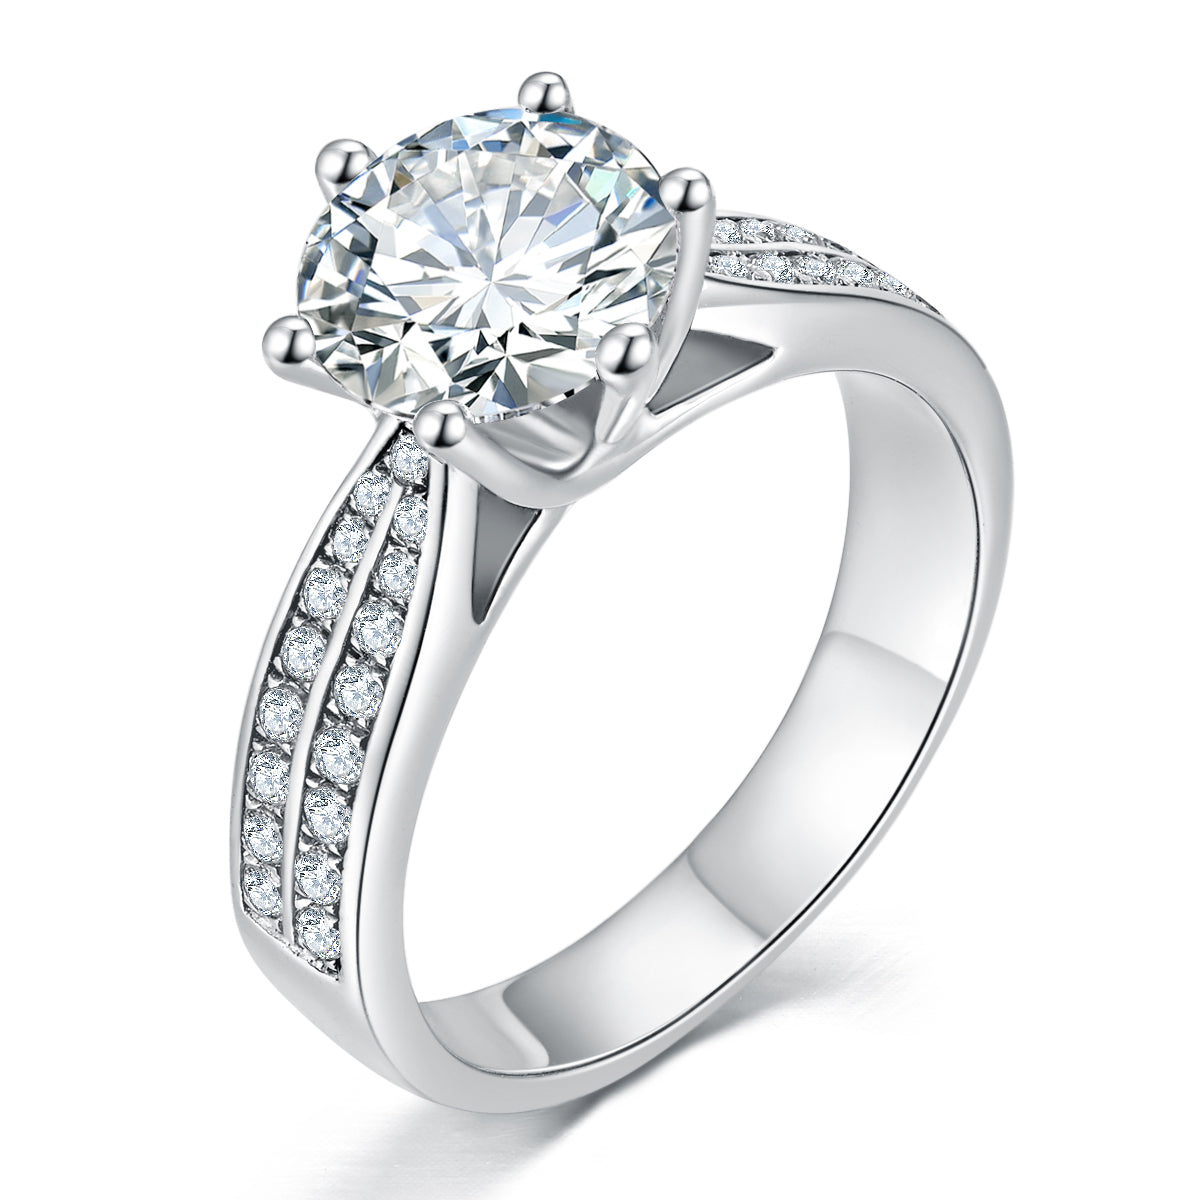 【02LIVE # link 44 - BUY 1 GET 1 free ring】RM1034 Queen of Stars Silver Moissanite Diamond Clad Ring with Zircon Edge